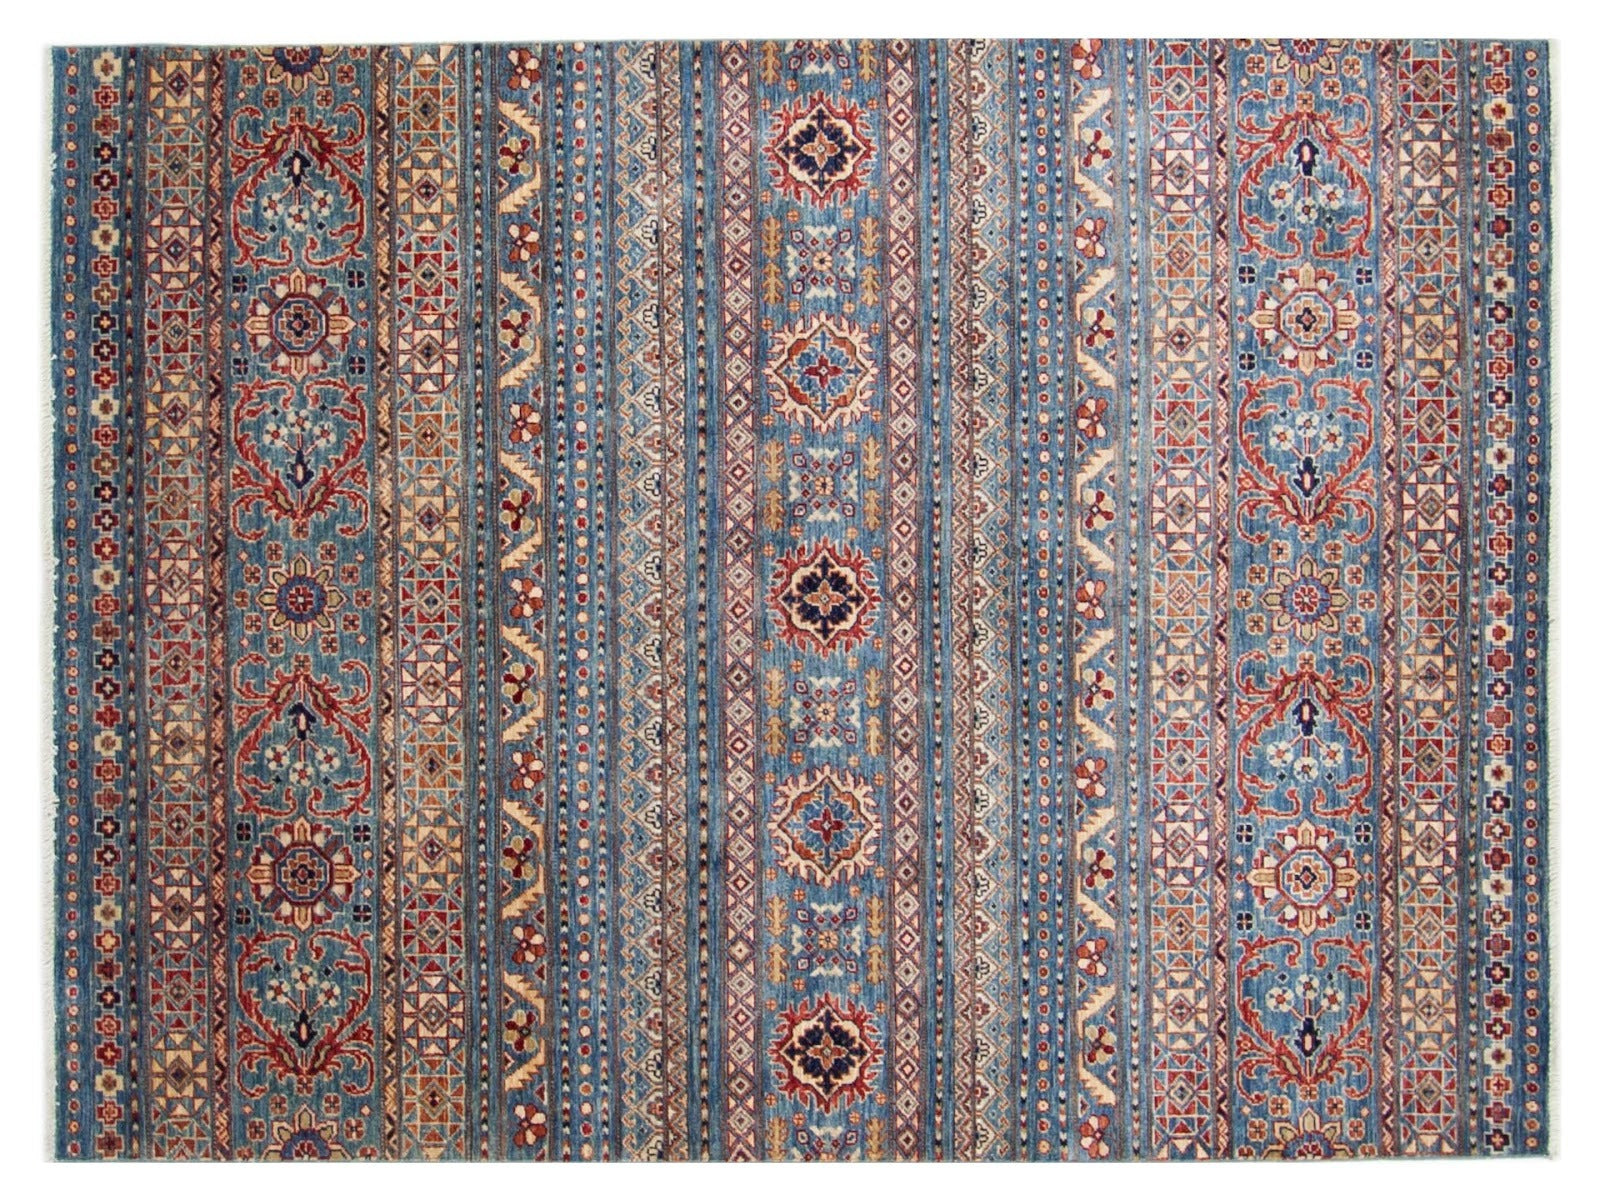 5x8 tribal wool rug with colorful motifs and a blue border, reflecting Kazak-inspired design